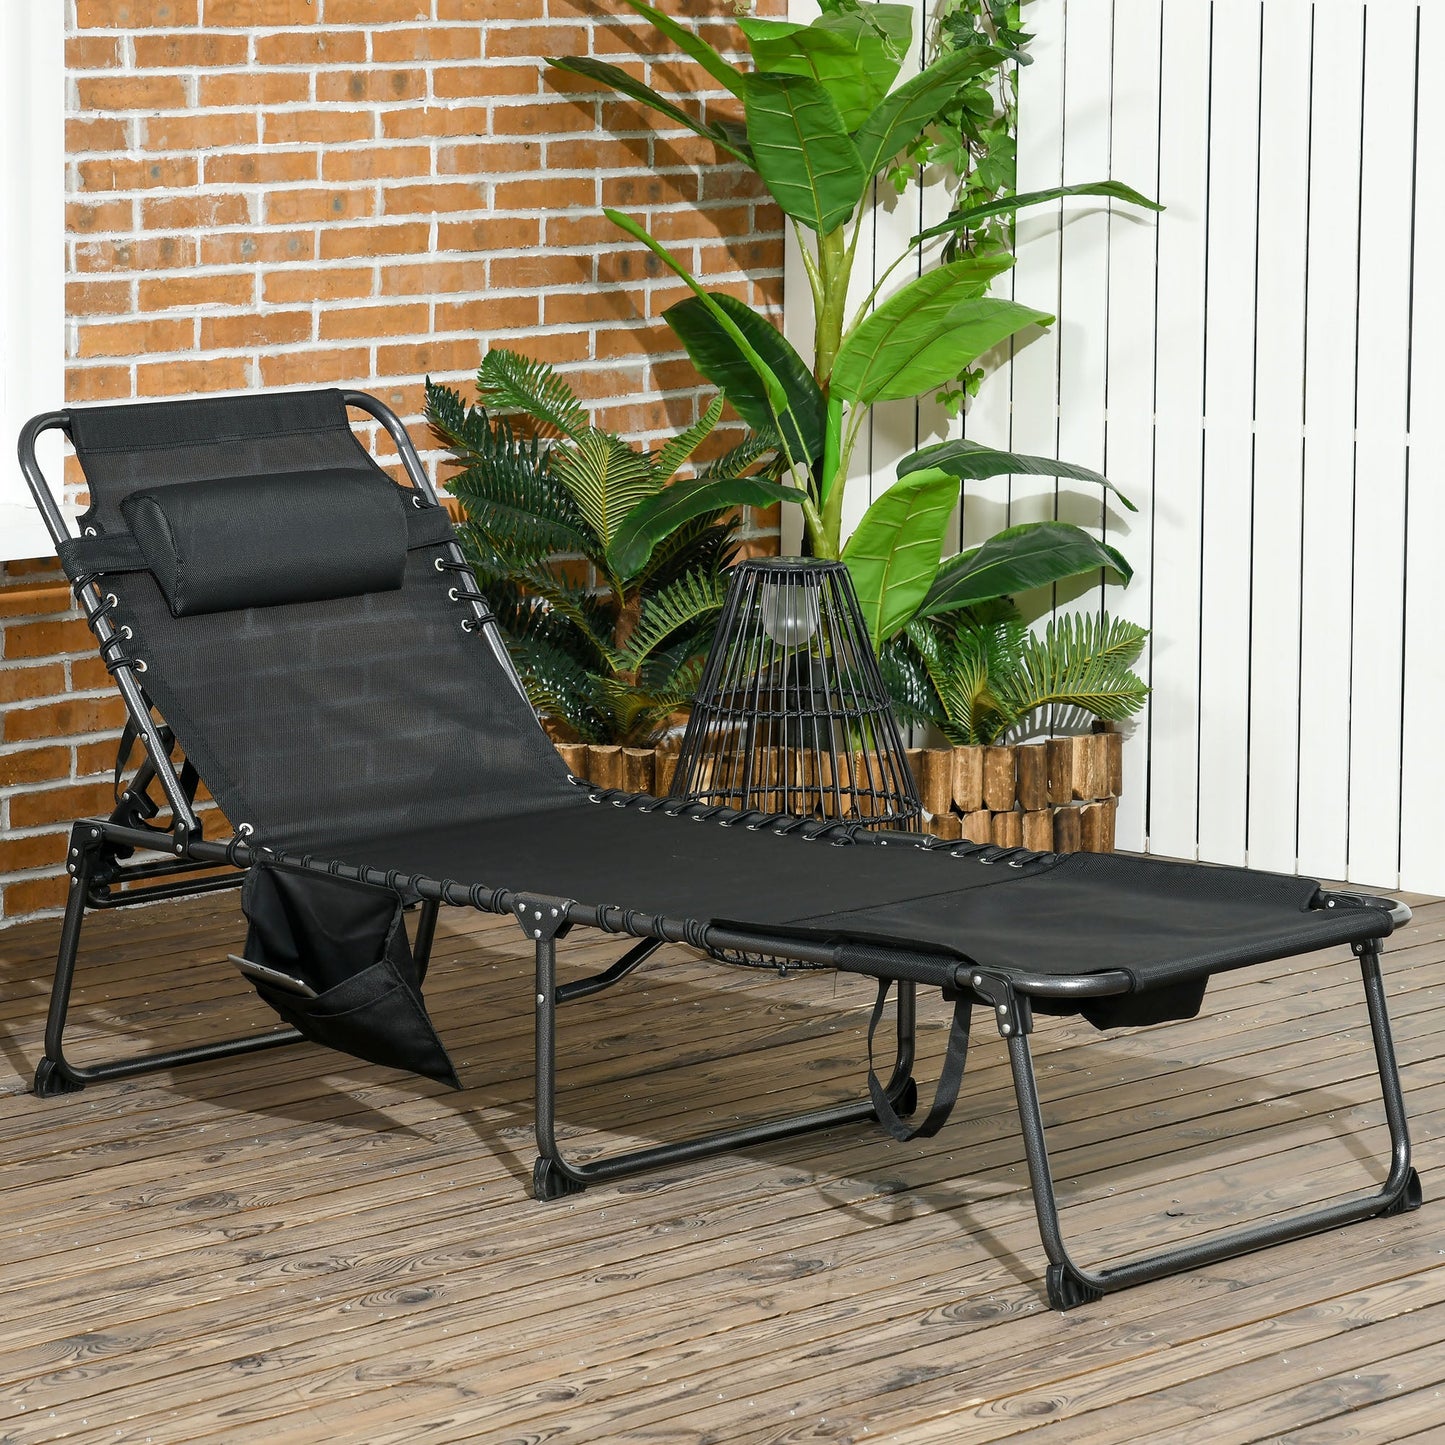 -Outsunny Folding Chaise Tanning Lounge Chair w/ 5-level Reclining Back, Reading Hole, Side Pocket, Headrest, Black - Outdoor Style Company